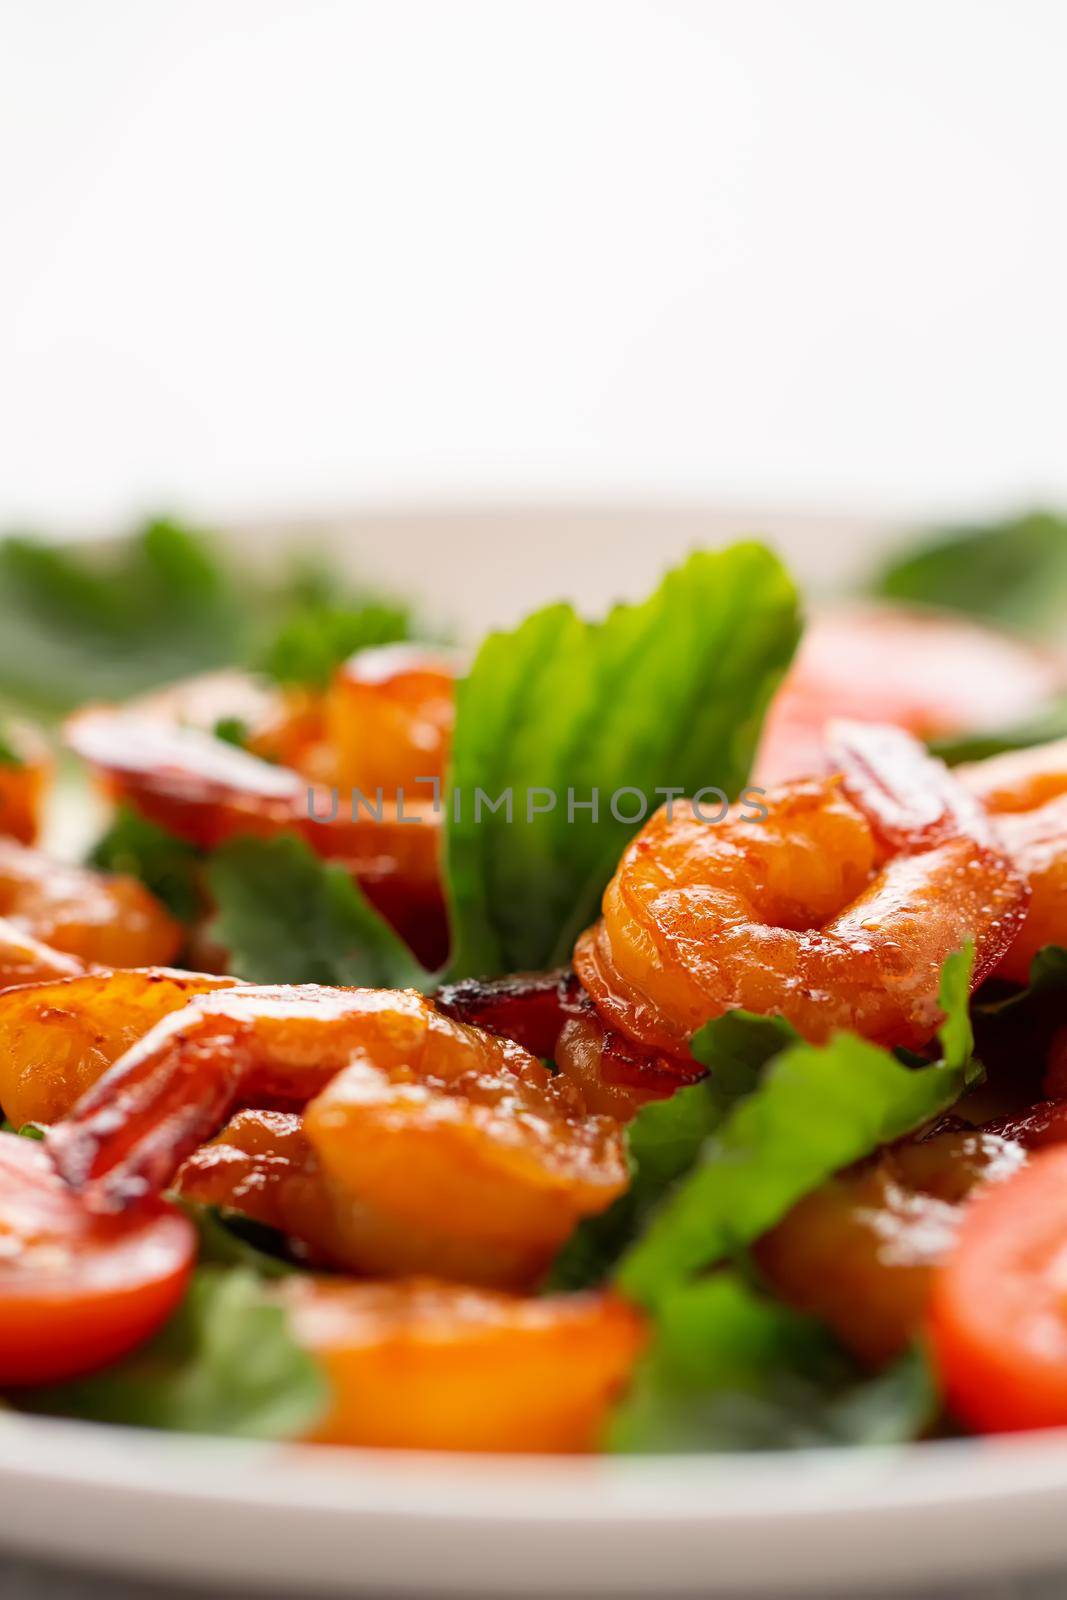 Close-up of fresh shrimp, tomato, arugula and greens salad, vertical image with copy space by galsand